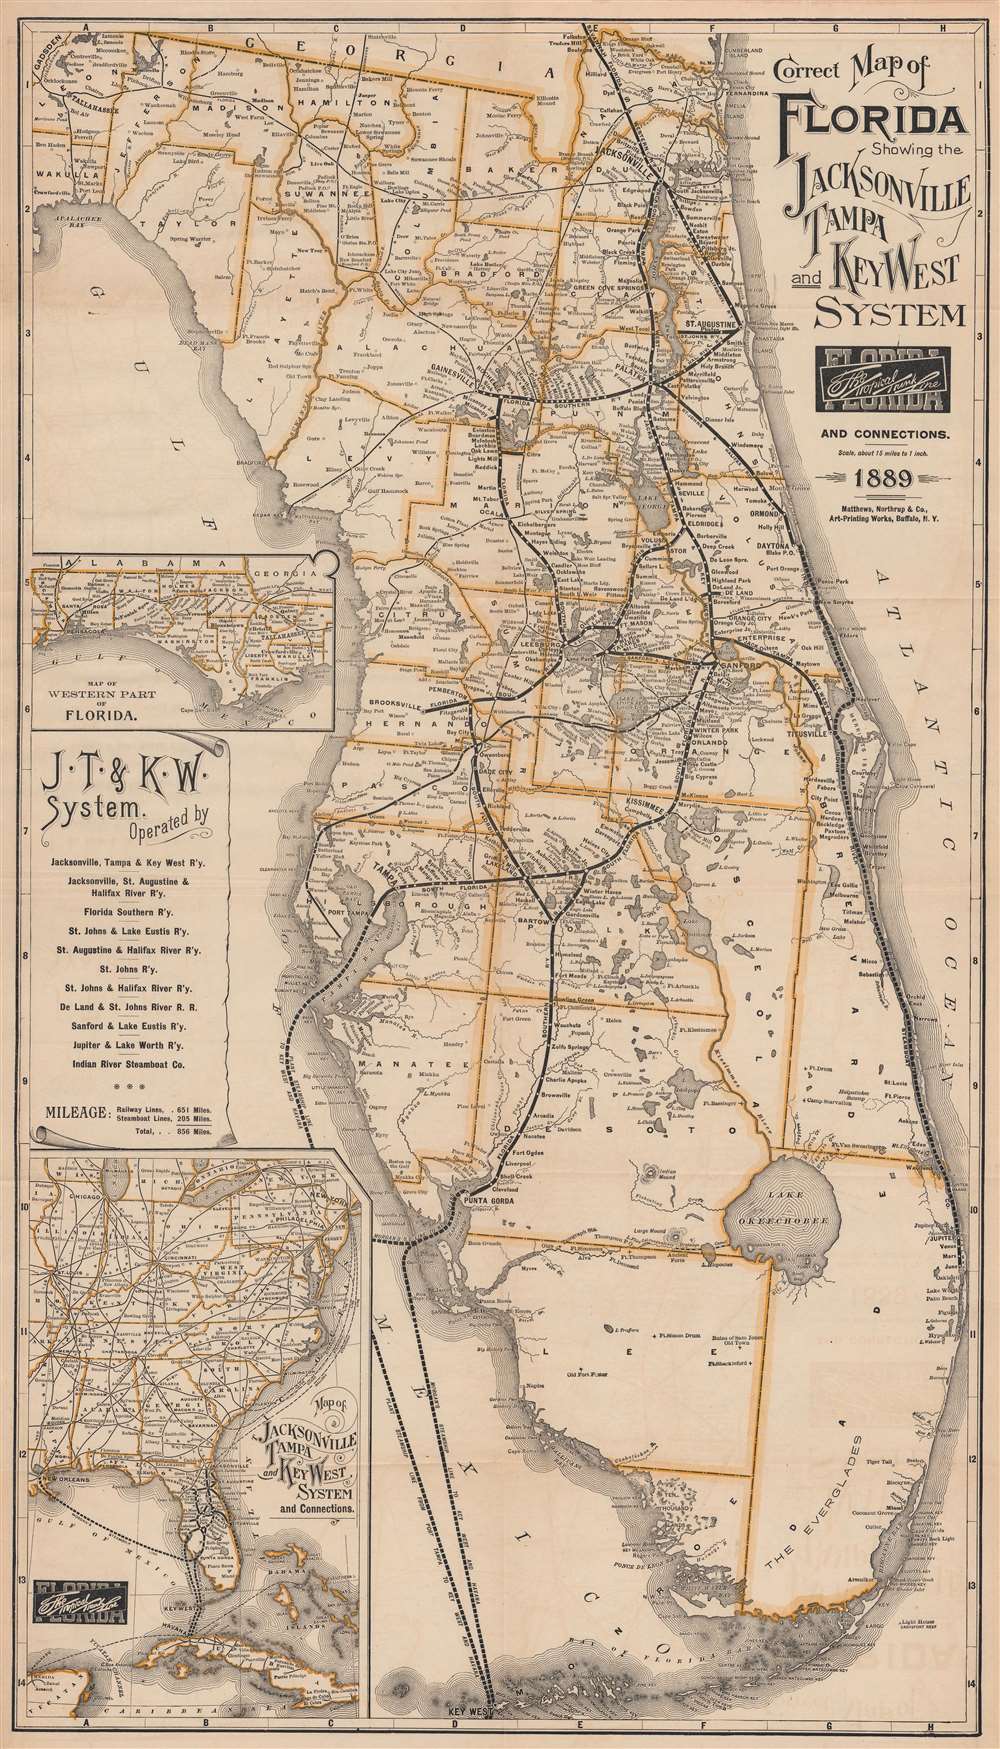 Correct Map of Florida Showing the Jacksonville Tampa and Key West System and Connections. - Main View